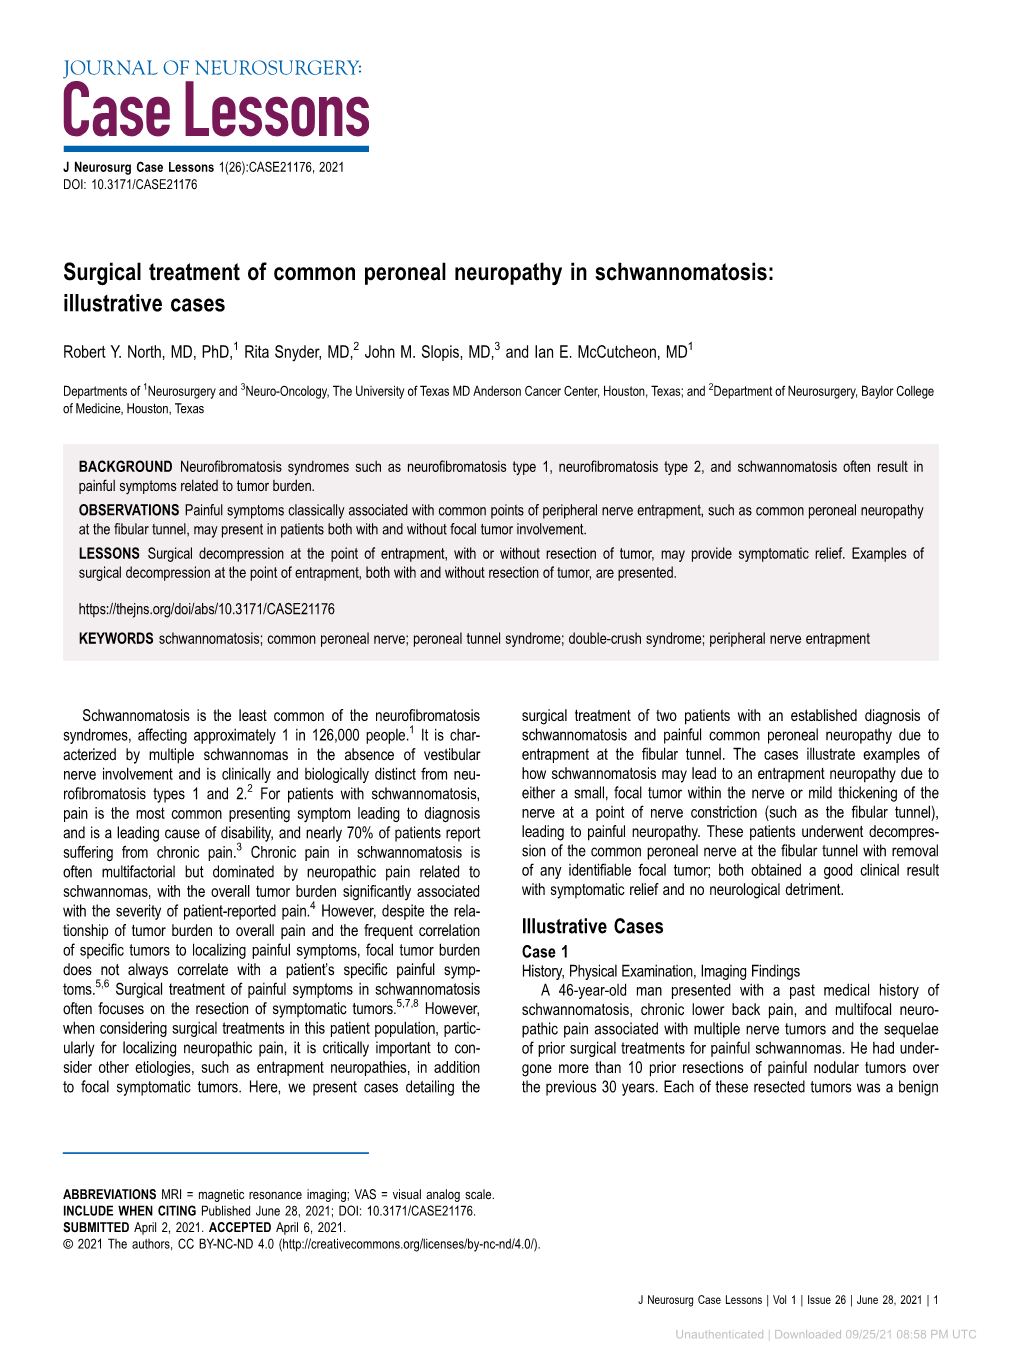 Surgical Treatment of Common Peroneal Neuropathy in Schwannomatosis: Illustrative Cases